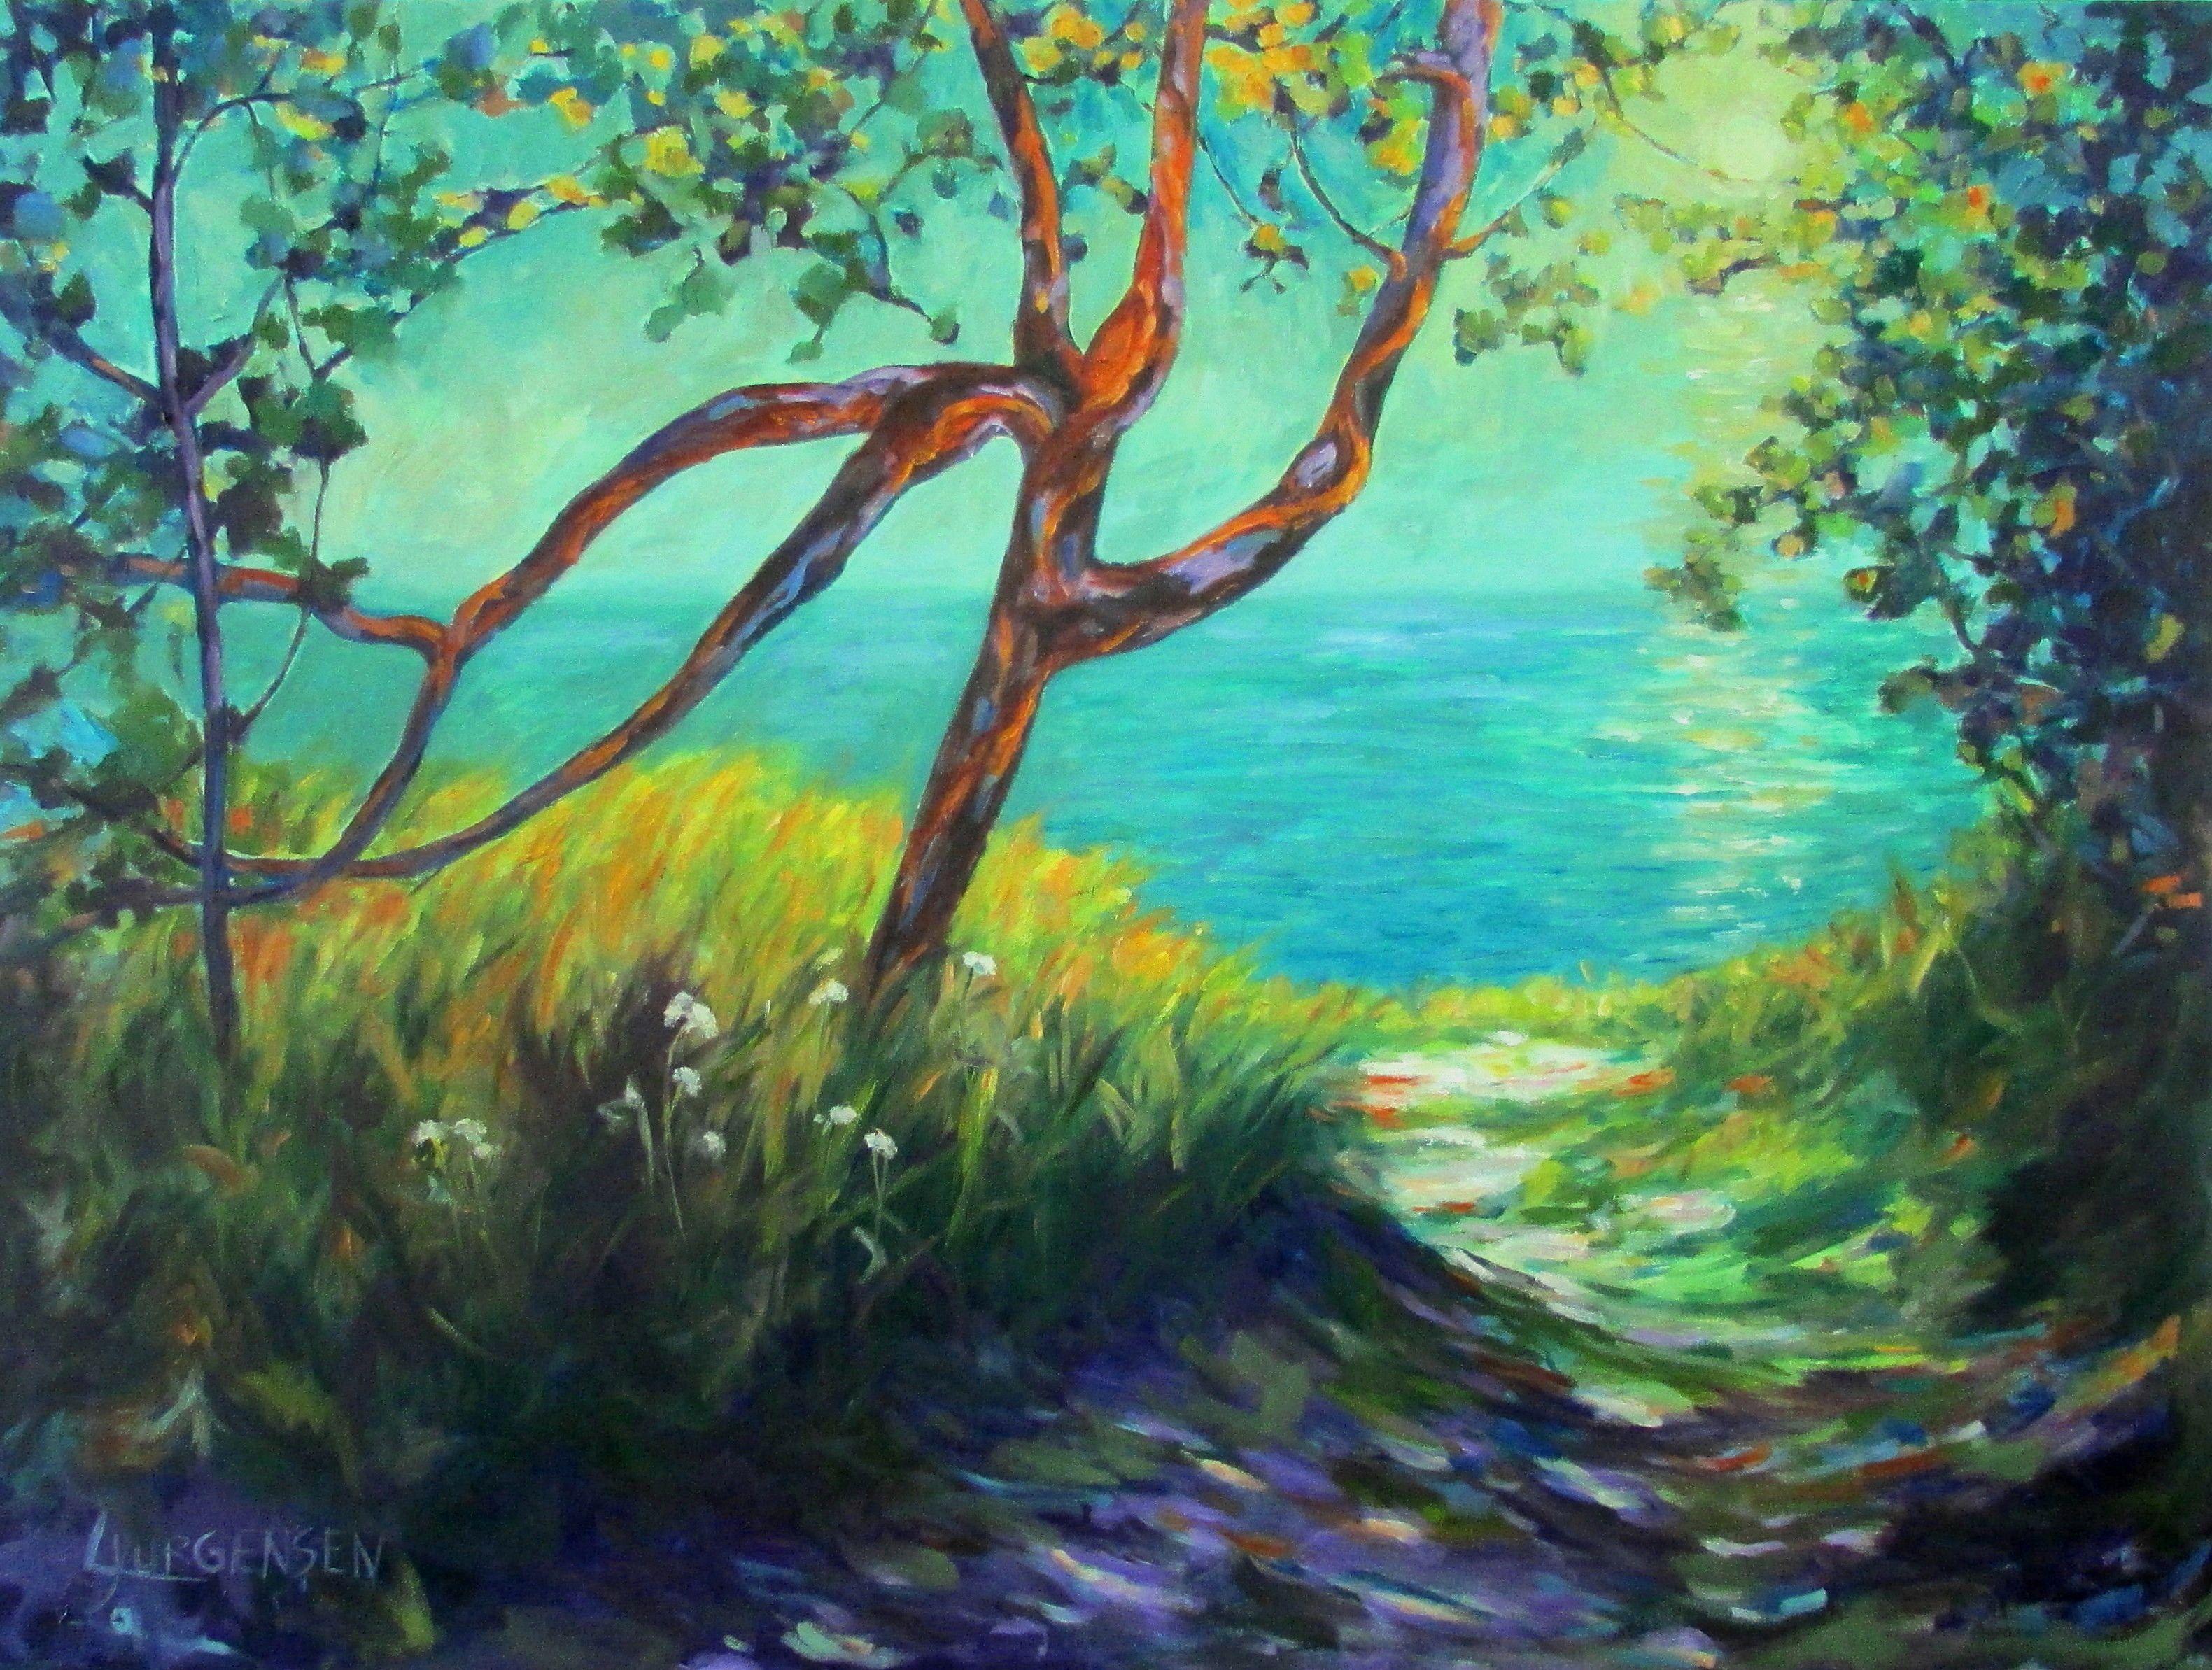 Princess Louisa Marine Park is a remote and beautiful place accessible only by water.  We cruised there this past summer and I was taken aback by the beauty and the lovely colors of the water.  This painting is vivid and beautiful and the sides of